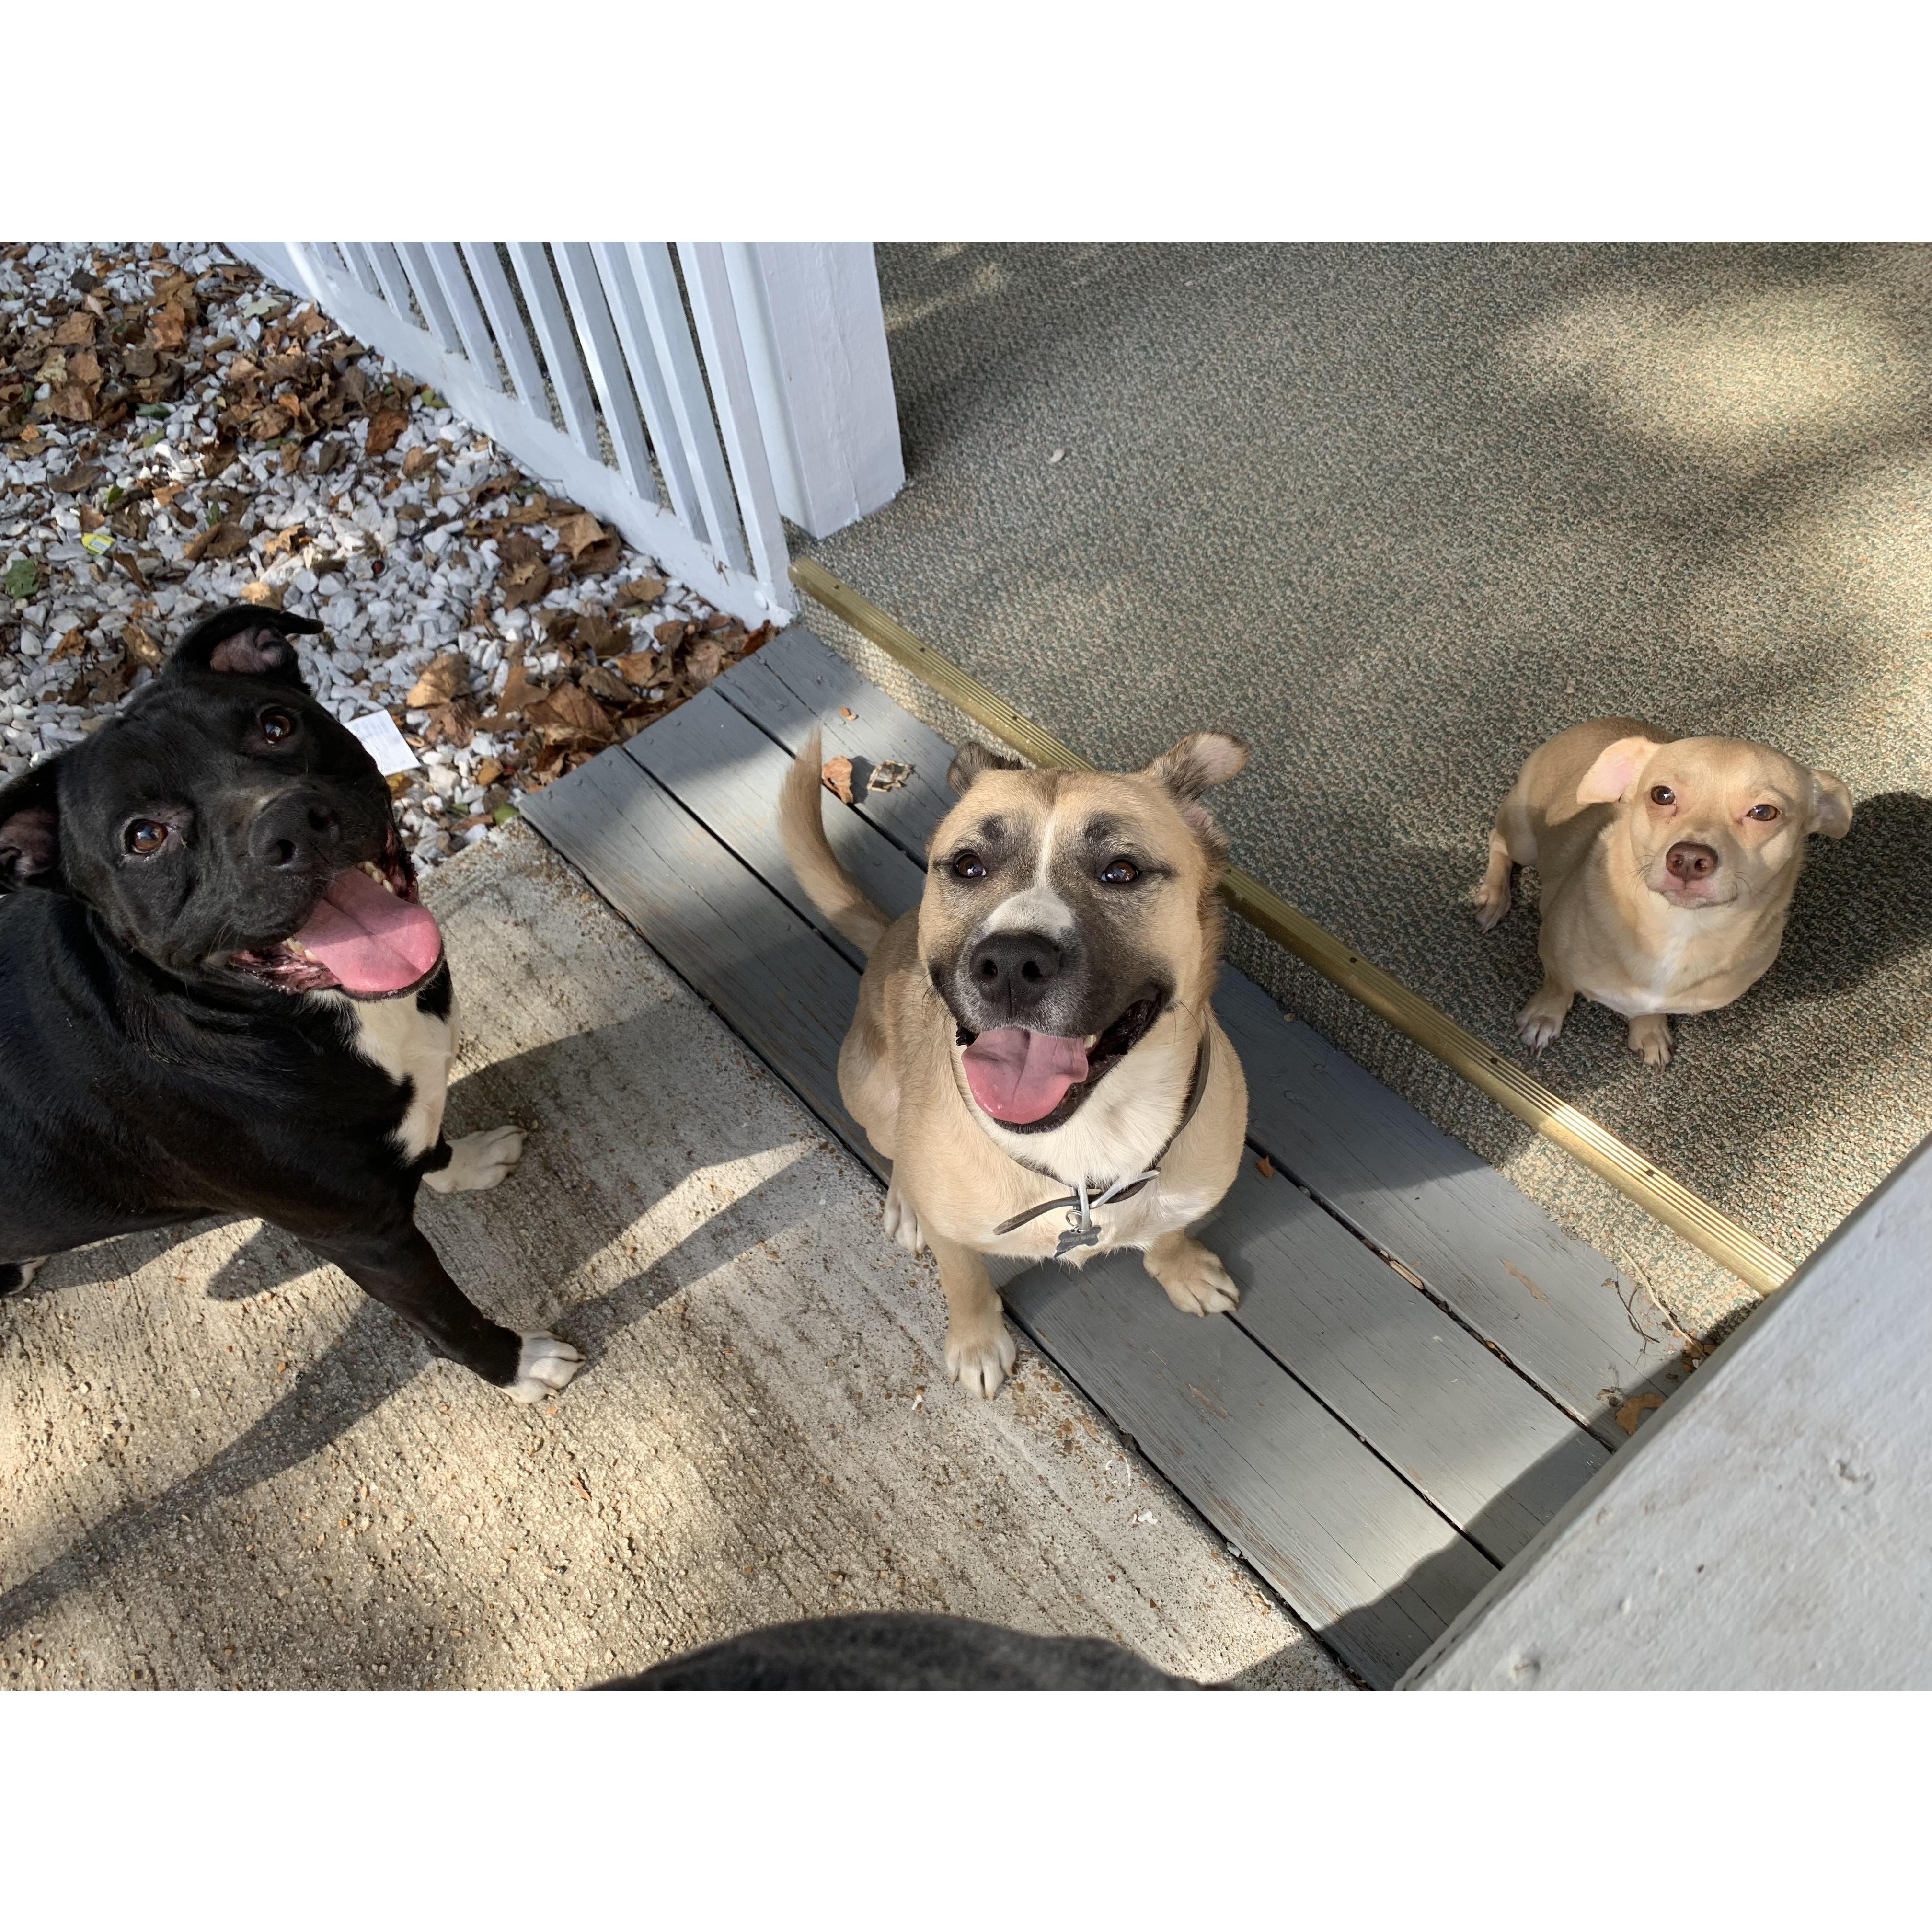 Kenny brought Cletus into the relationship and Megan brought Milo and Kevin! If you ever hear us talk about “The boys” this is who we’re talking about! Right to left: Milo, Cletus, Kevin